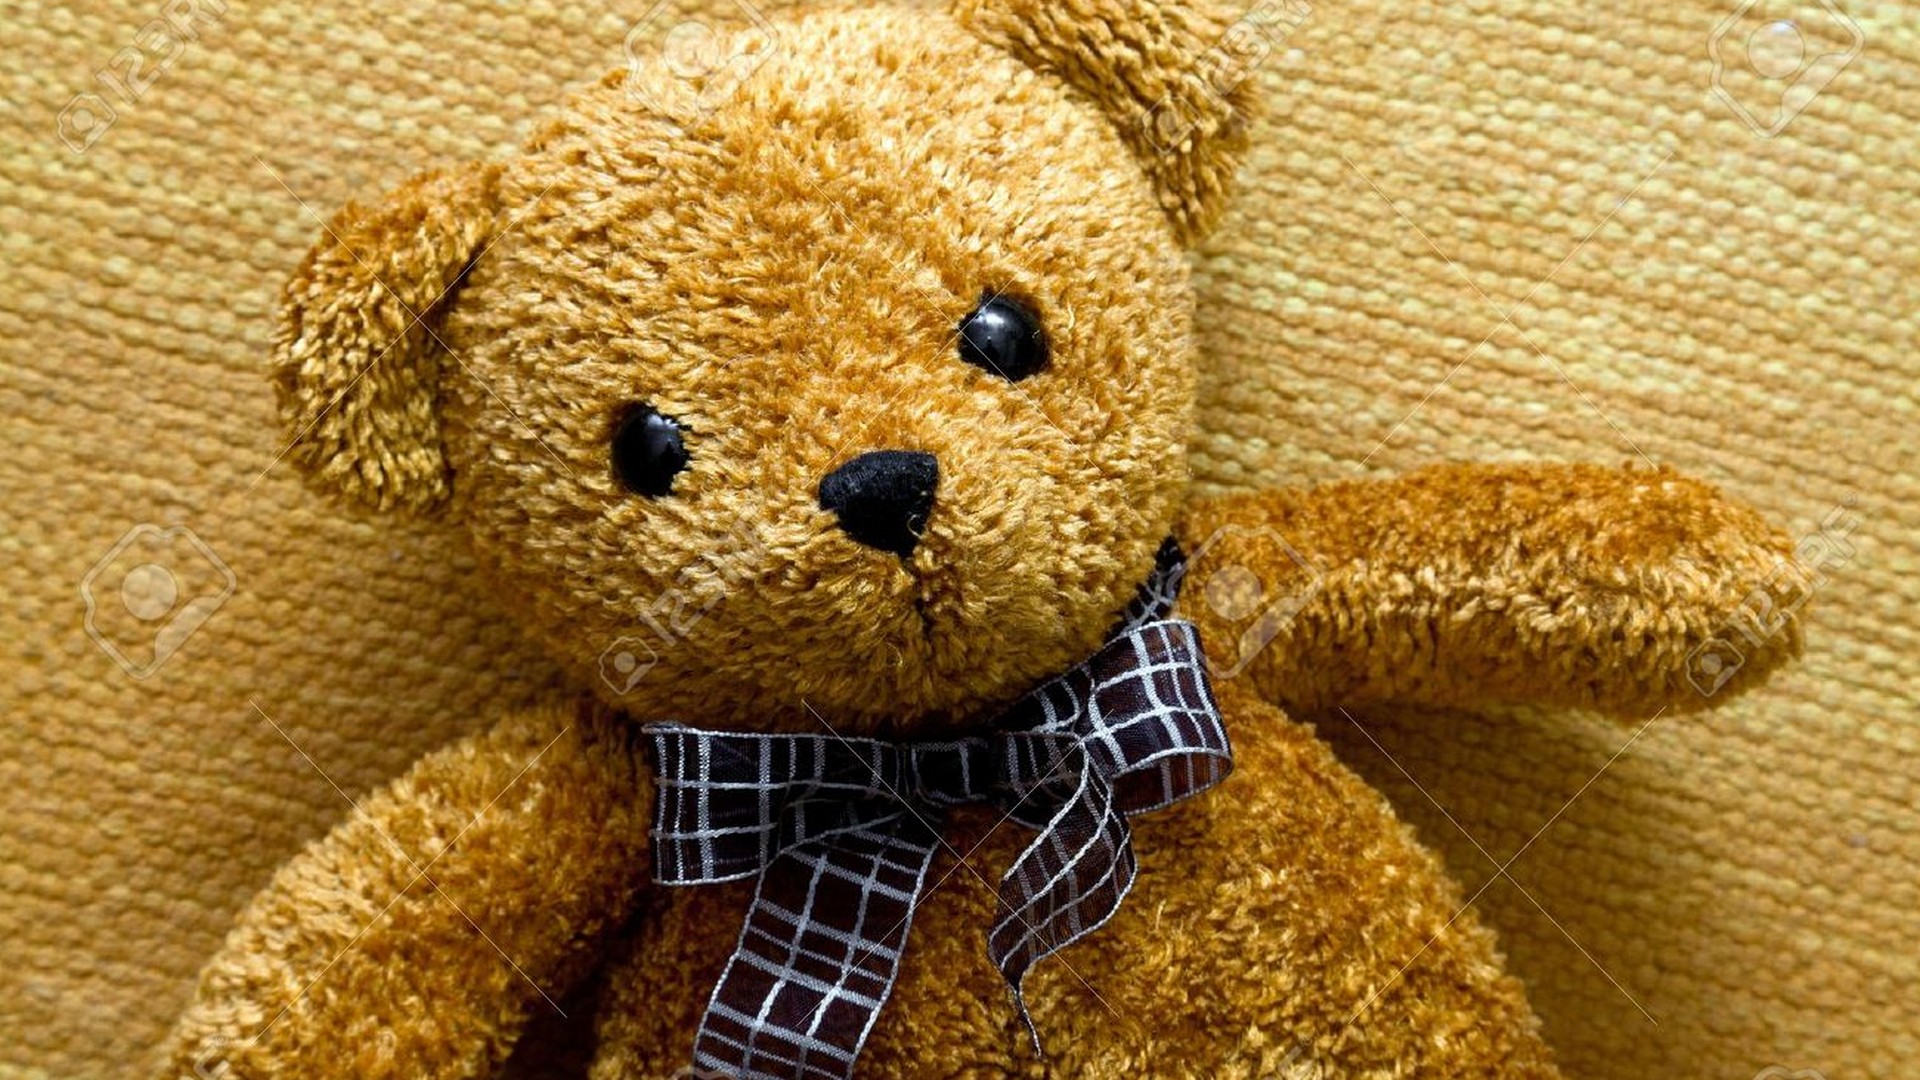 Teddy Bear Desktop Backgrounds With Resolution 1920X1080 pixel. You can make this wallpaper for your Desktop Computer Backgrounds, Mac Wallpapers, Android Lock screen or iPhone Screensavers